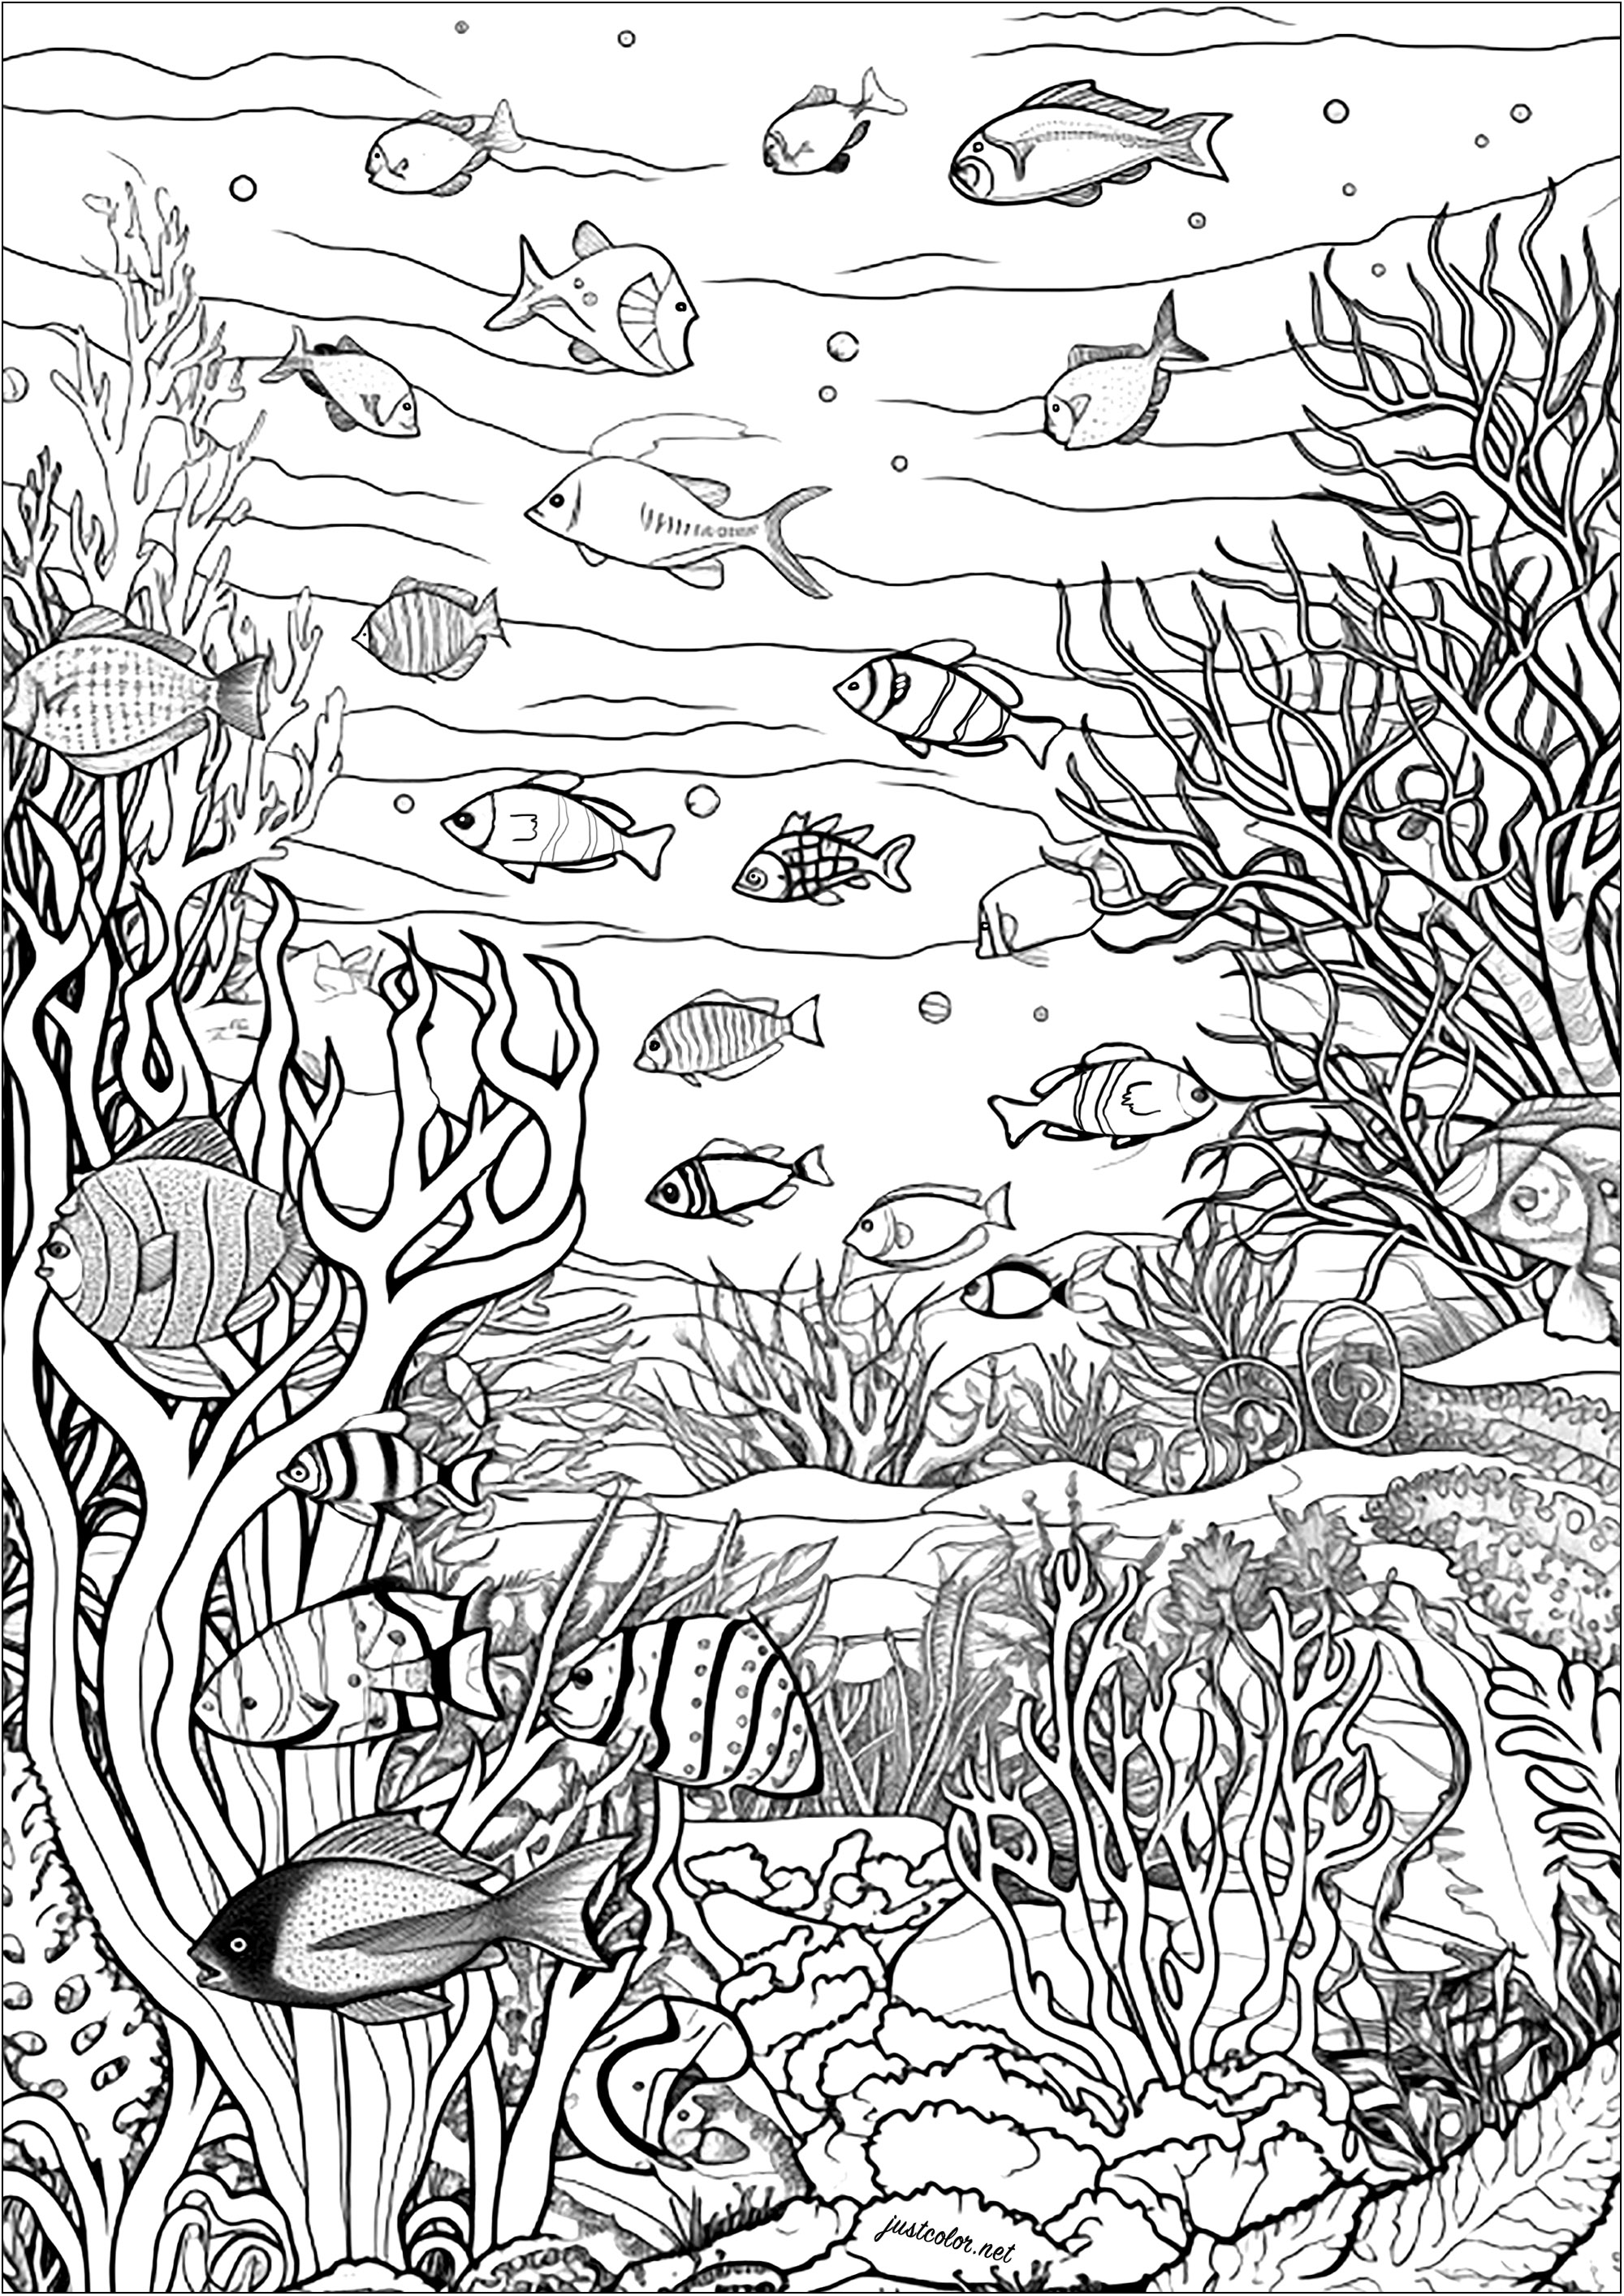 Many fish and corals. Color these pretty fishes, swimming in the middle of seaweeds swaying with the currents and corals whose complex structures line the ocean floor